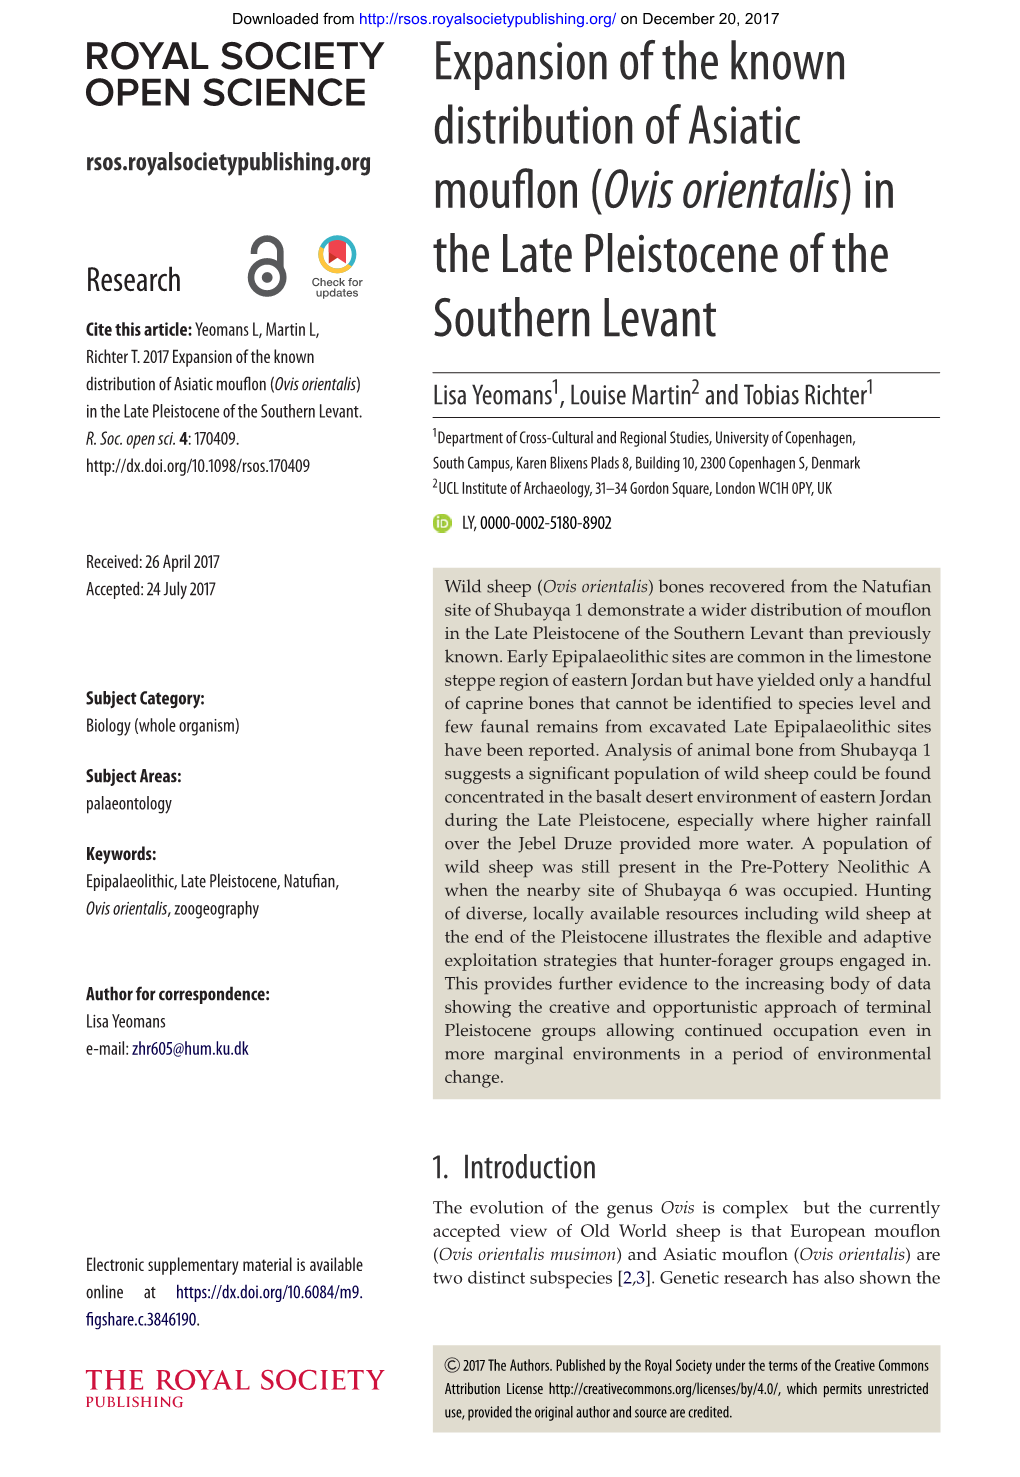 (Ovis Orientalis) in the Late Pleistocene of the Southern Levant